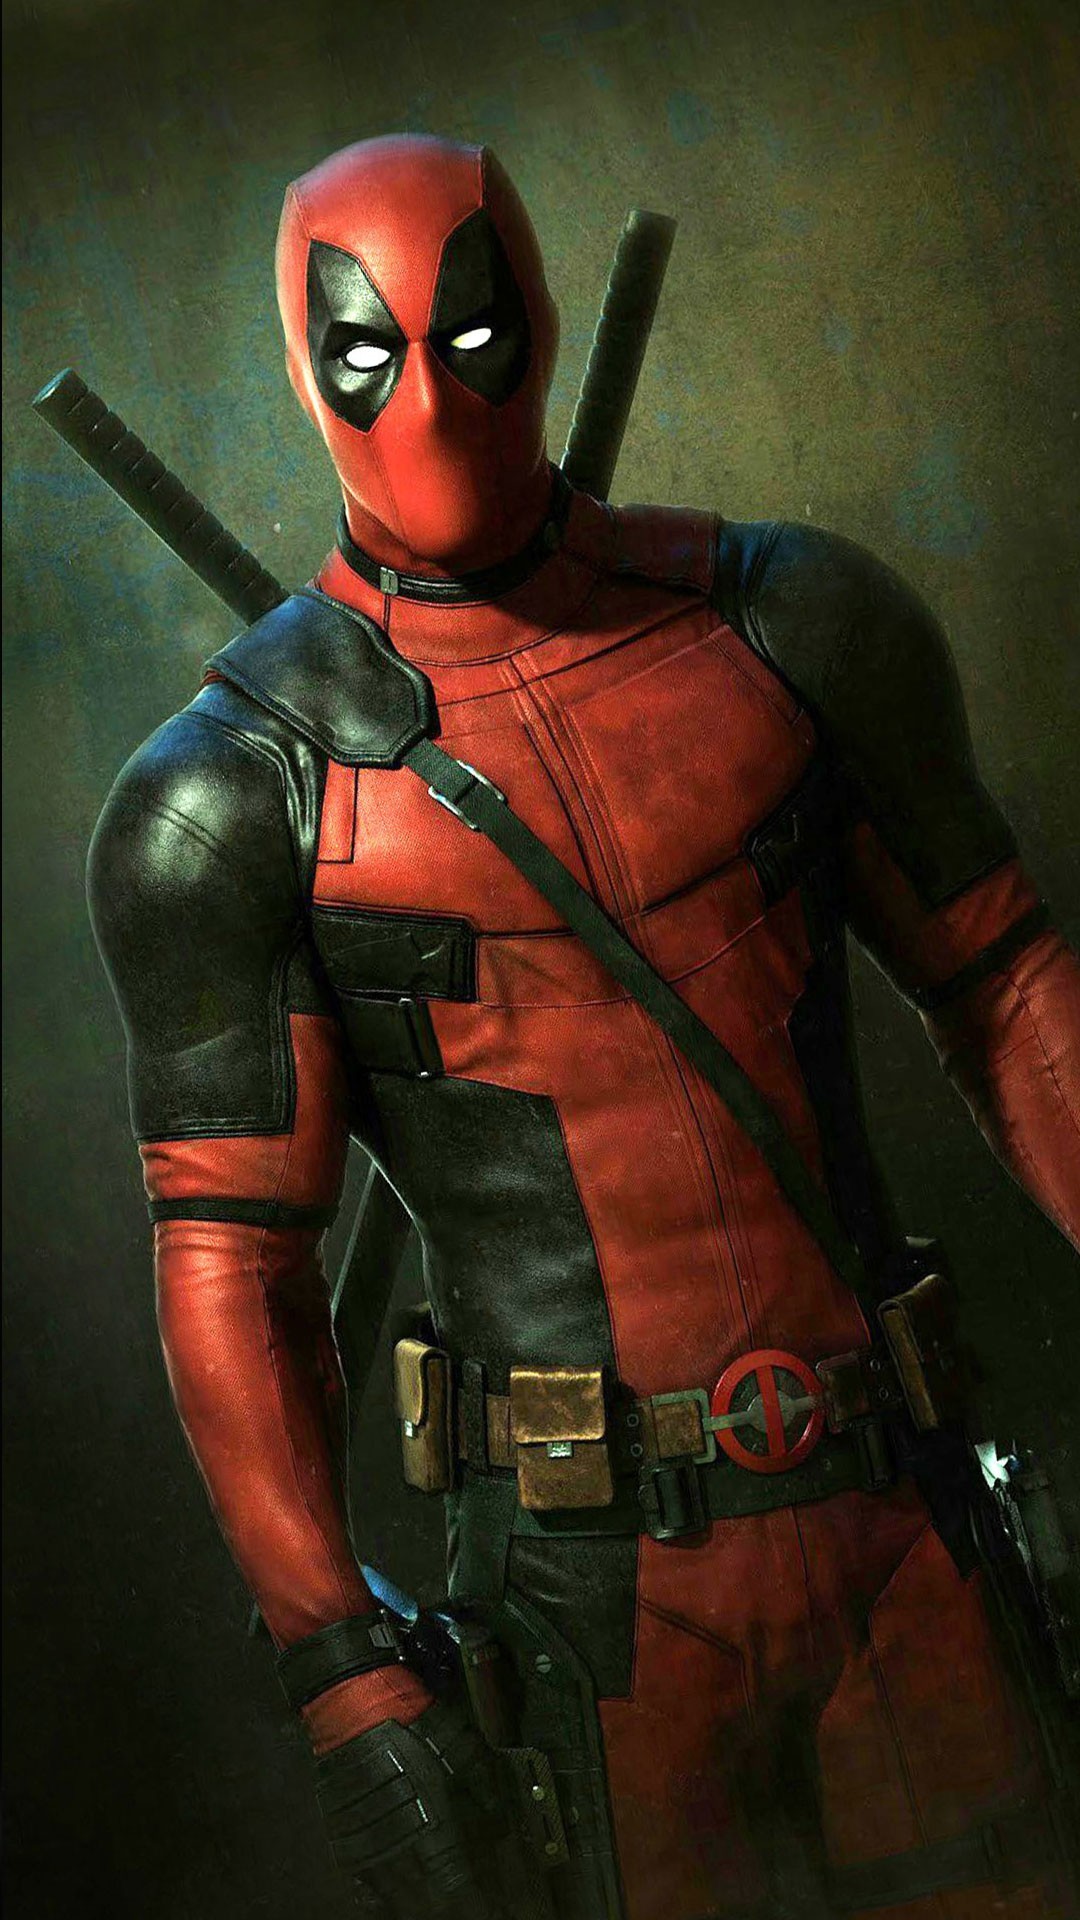 Deadpool From The Movie - Deadpool Hd Wallpaper For Iphone 7 , HD Wallpaper & Backgrounds